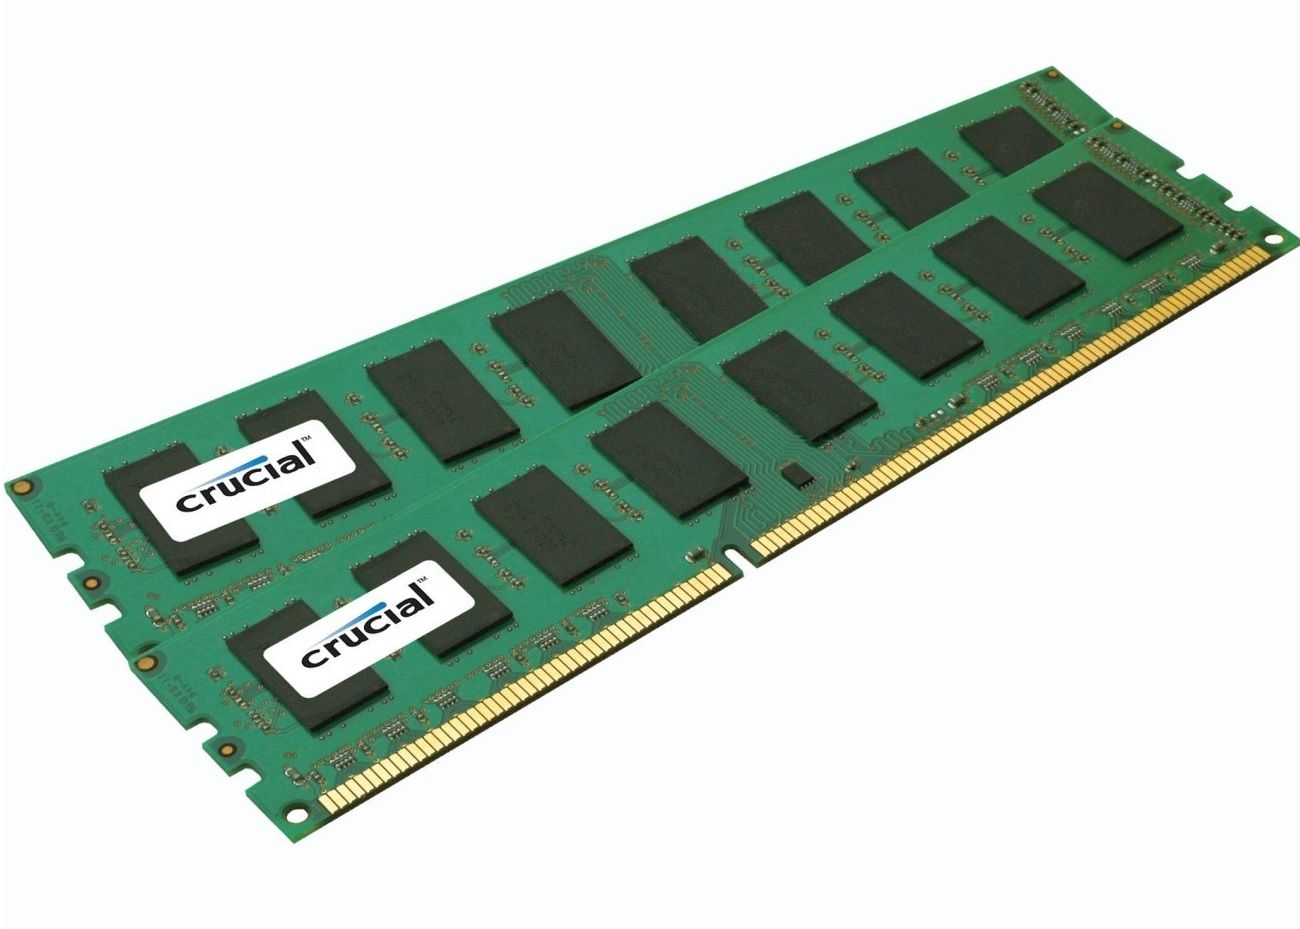 ddr4 ram coming next month double the speed triple the density and 20 per cent less power use than ddr3 image 1